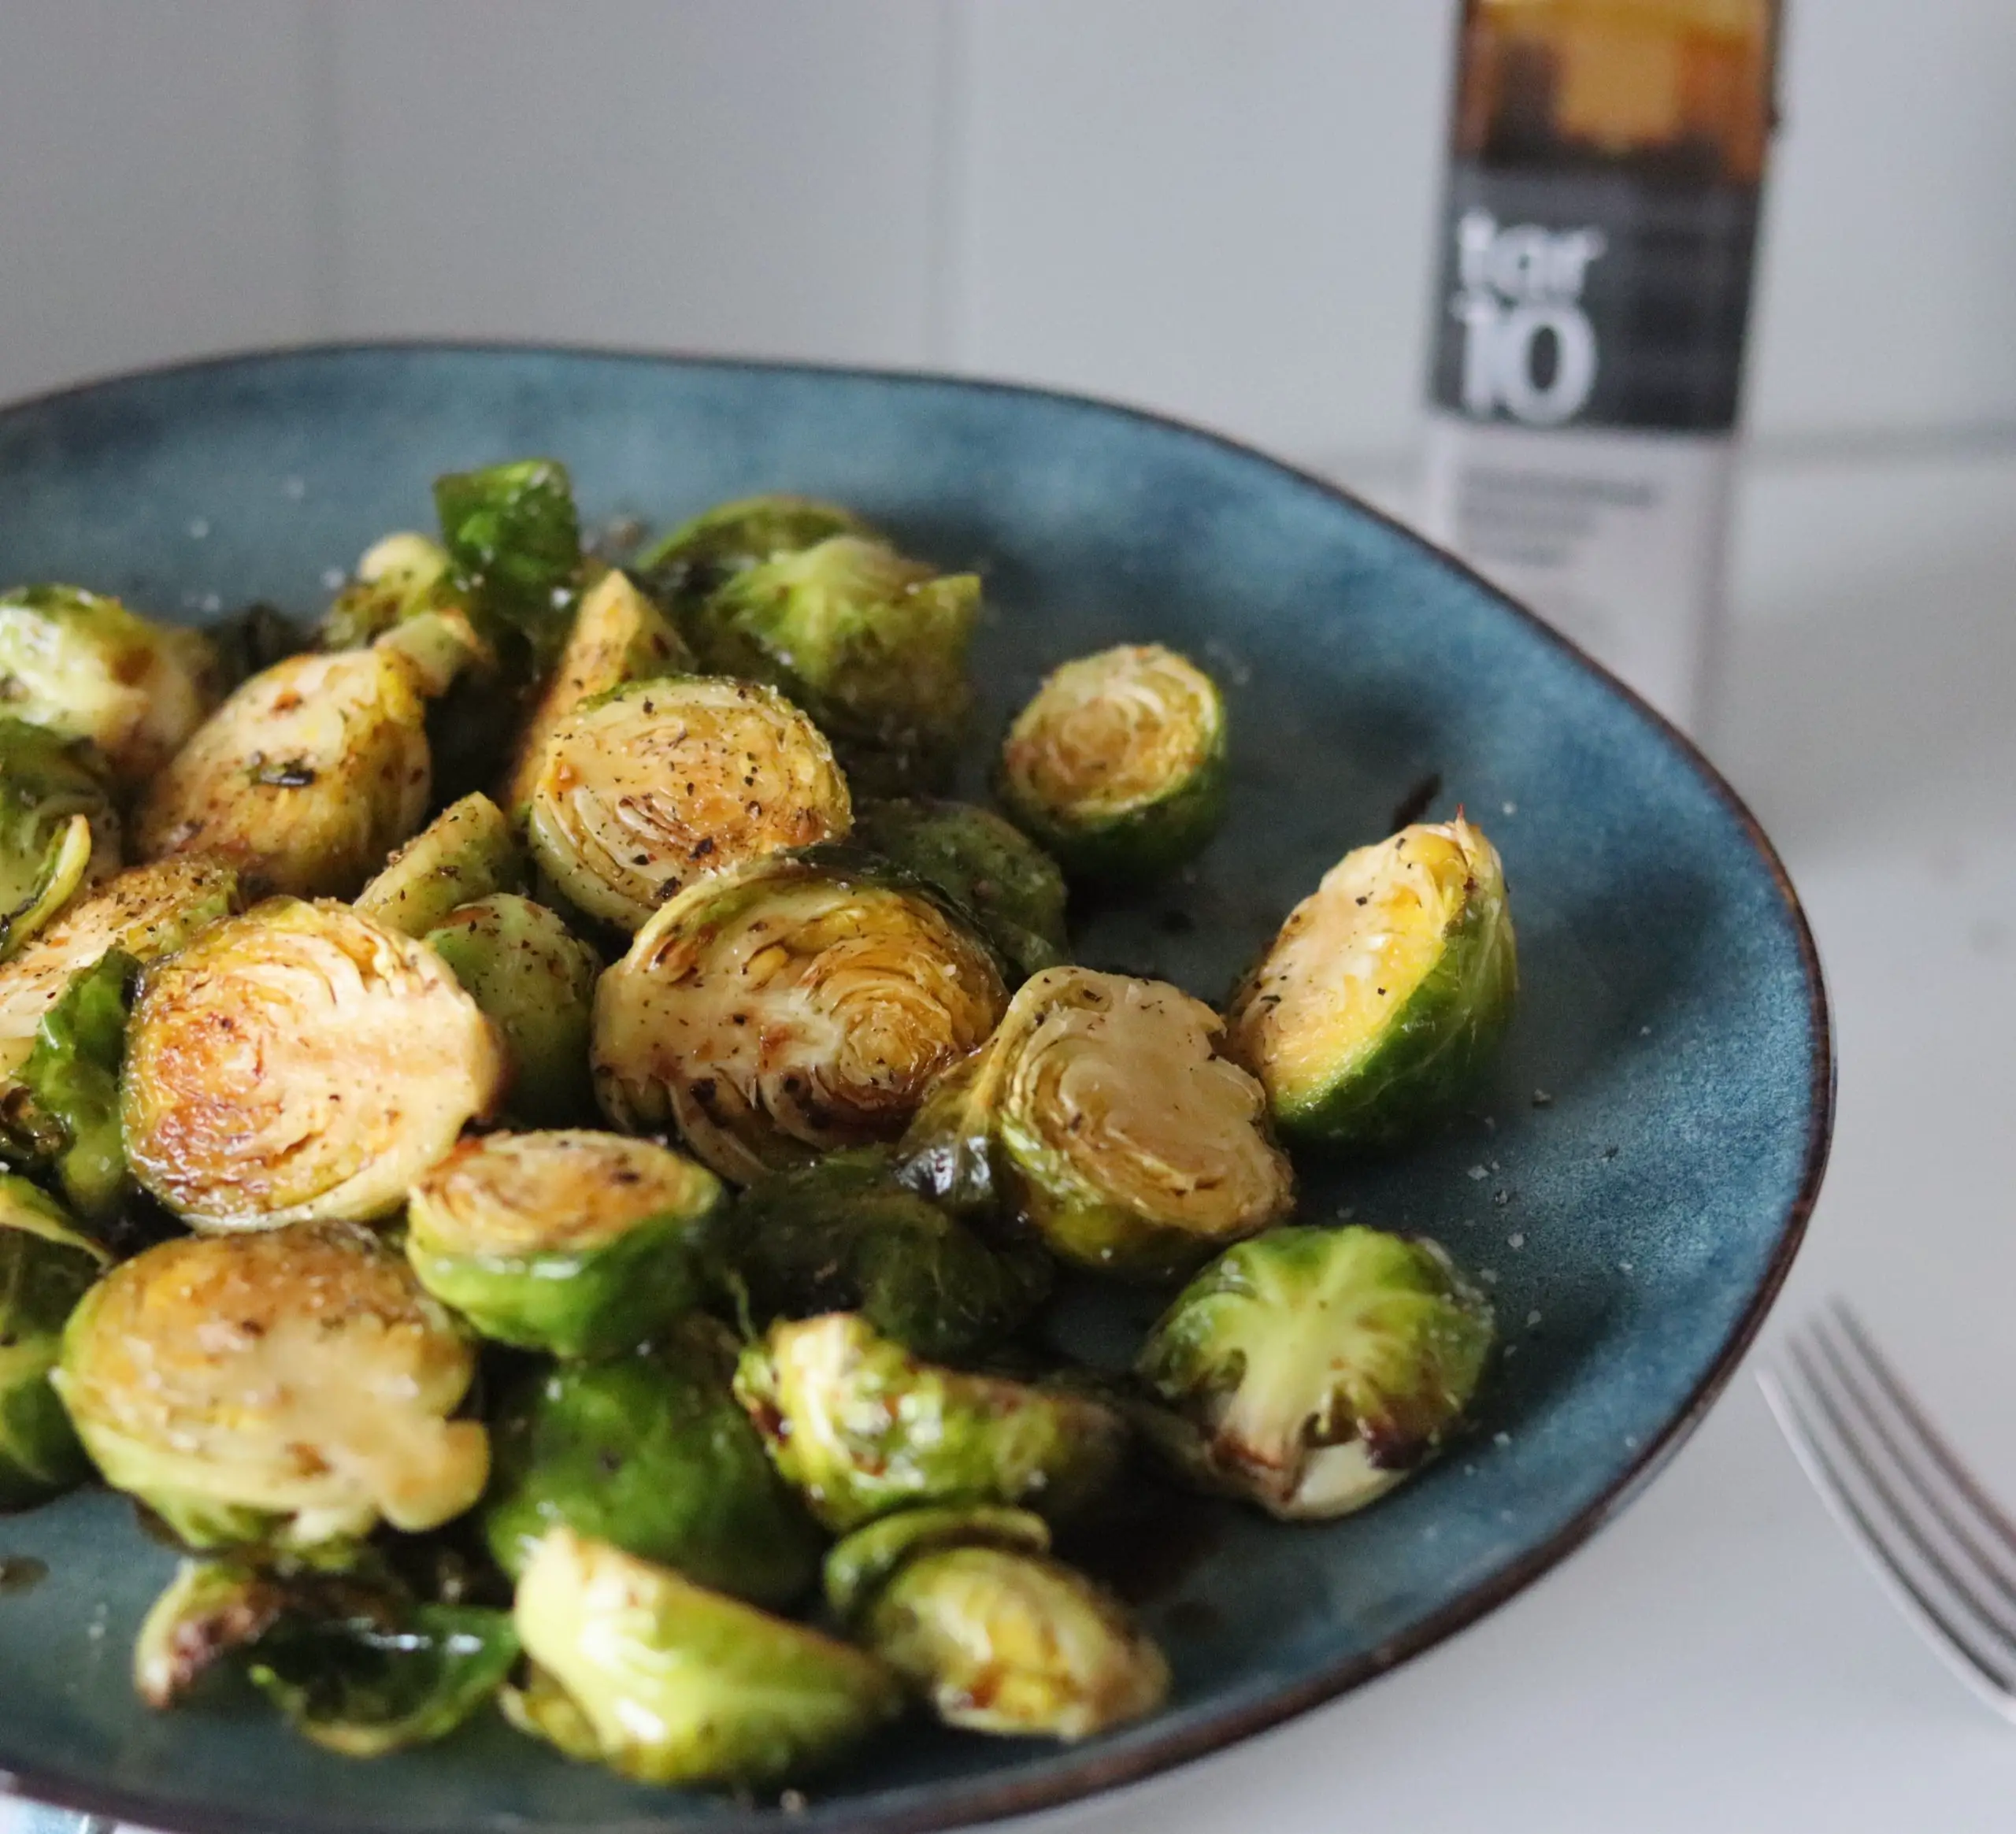 How to Freeze Fresh Brussel Sprouts